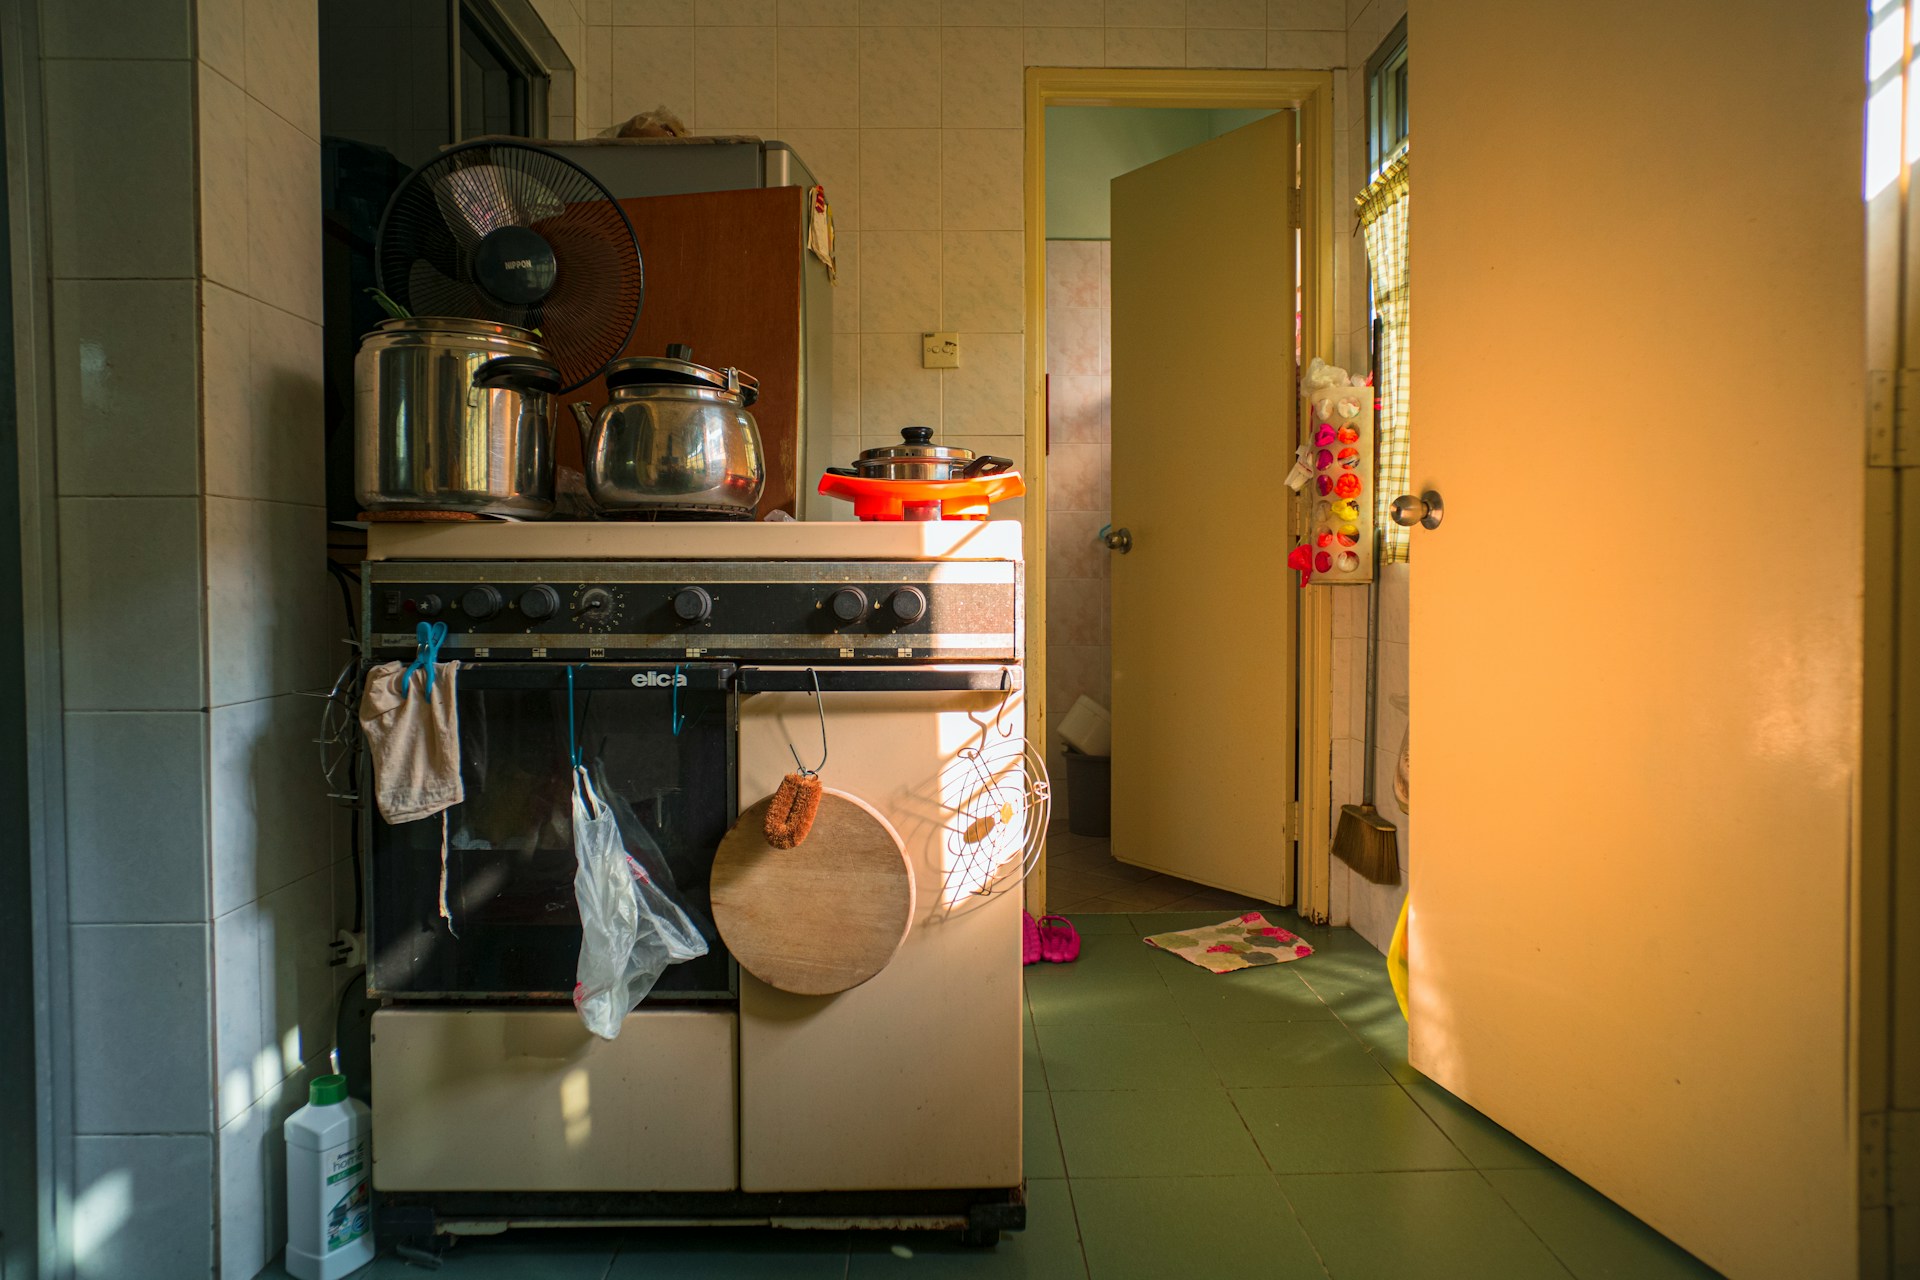 A messy kitchen. To the left is a stove with applicances on it. To the right is an open door leading into another room.